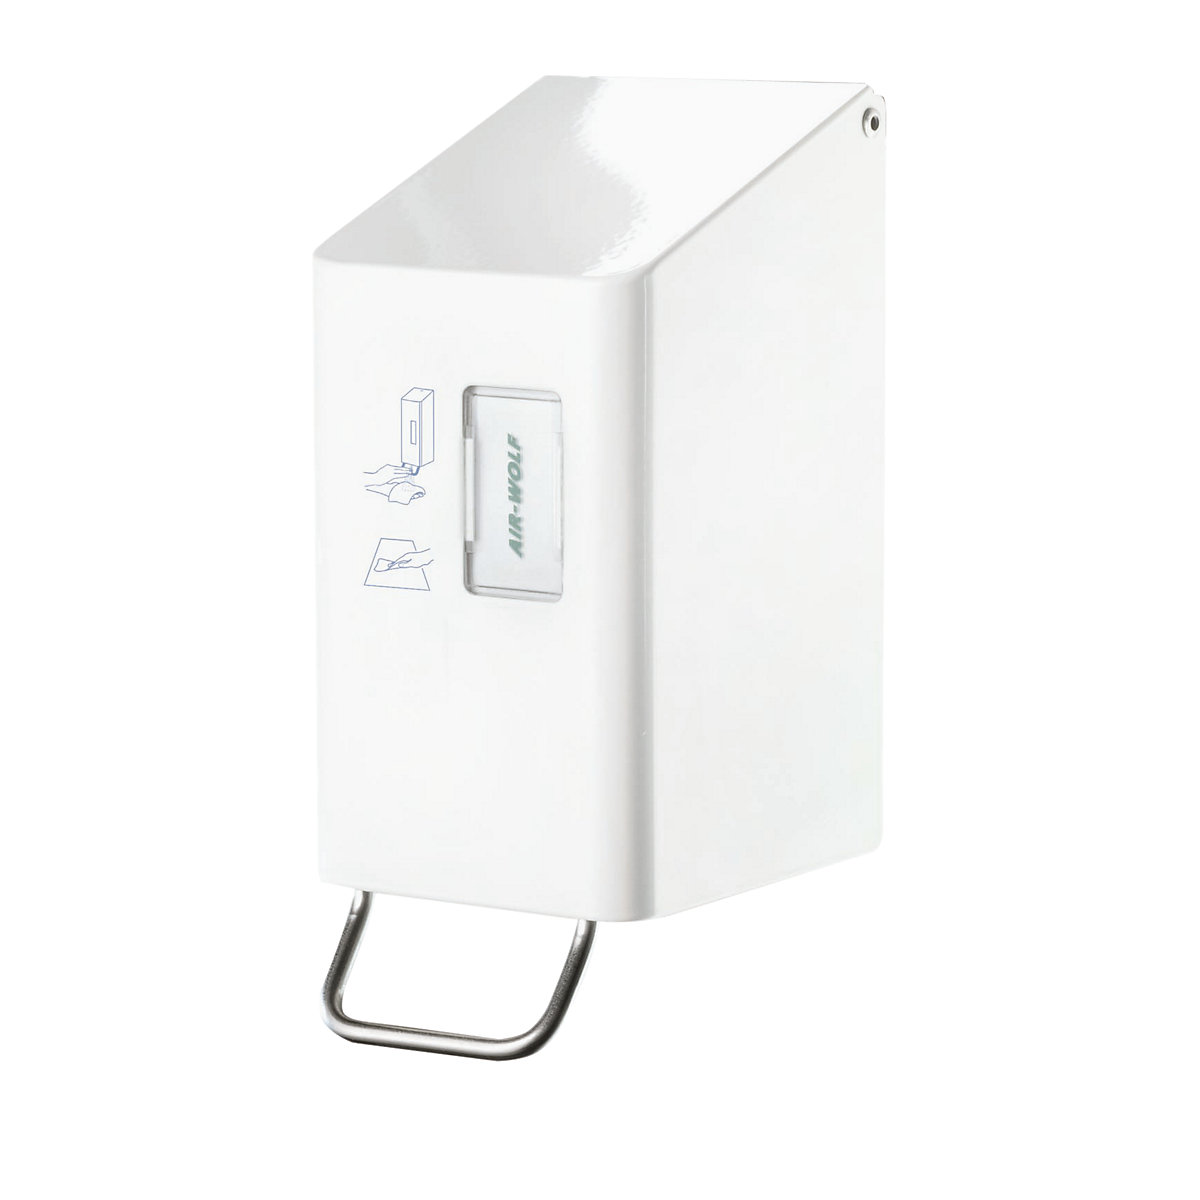 Dispenser for WC seat cleaner – AIR-WOLF